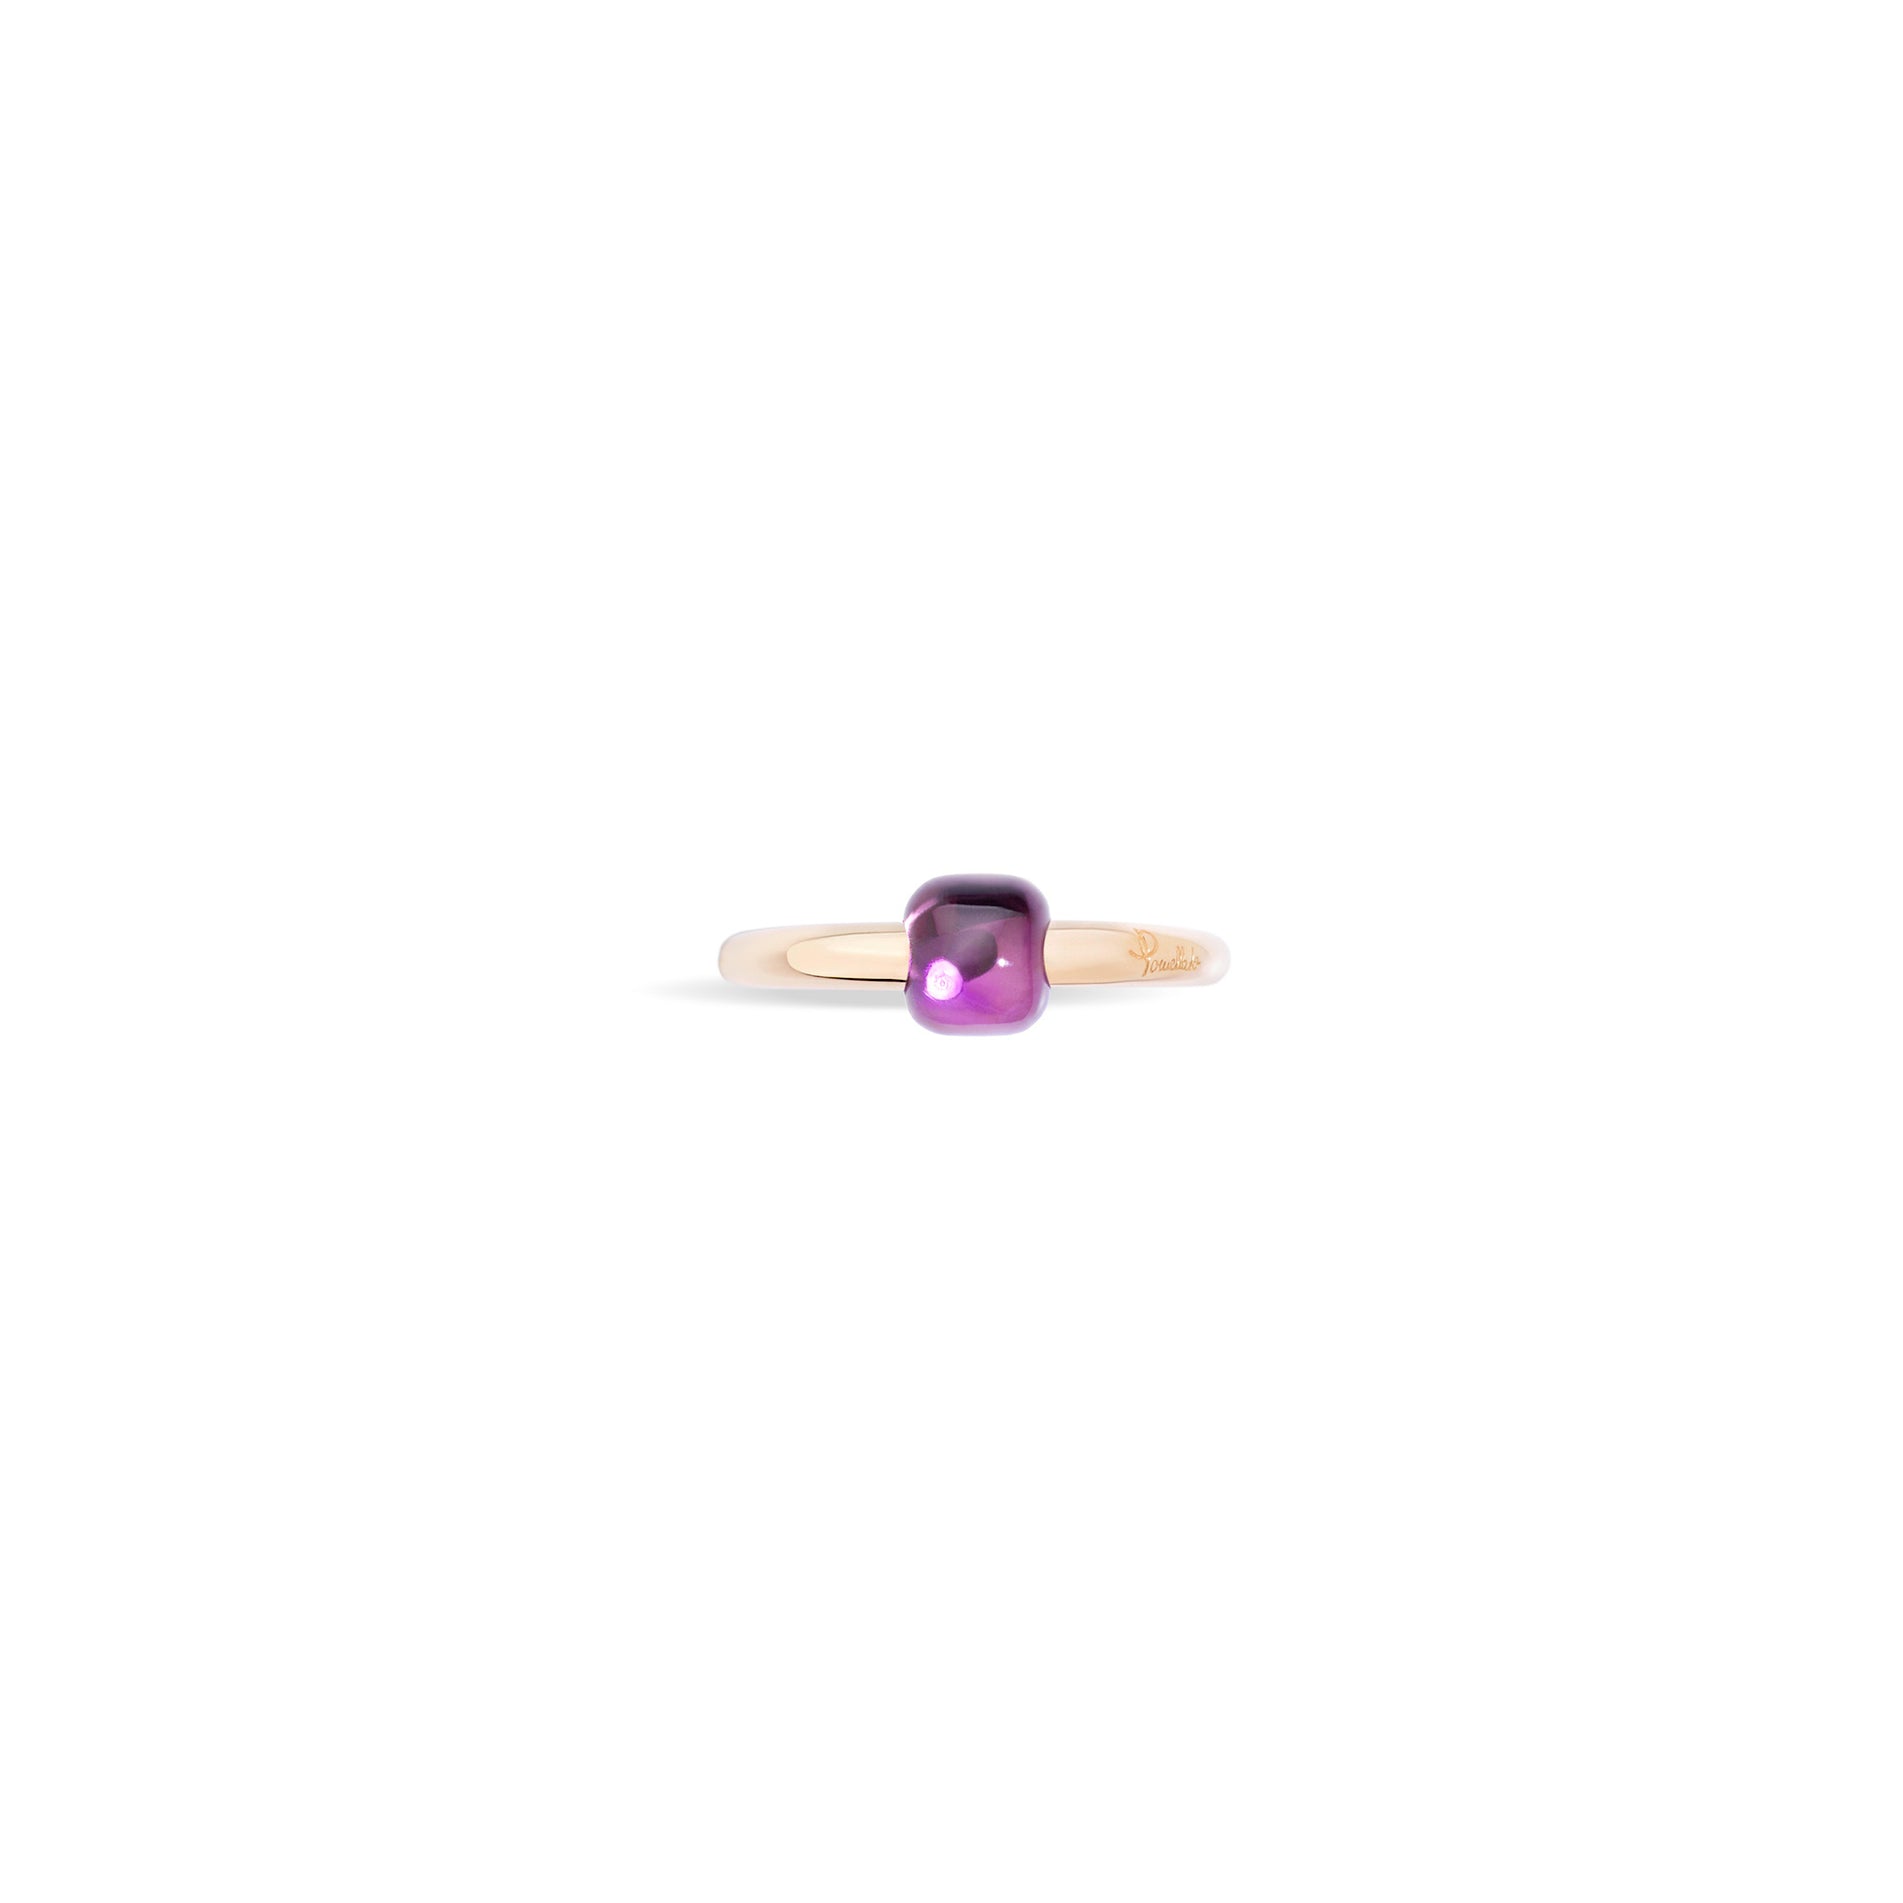 M'ama non M'ama Ring in 18k Rose Gold with Amethyst - Orsini Jewellers NZ